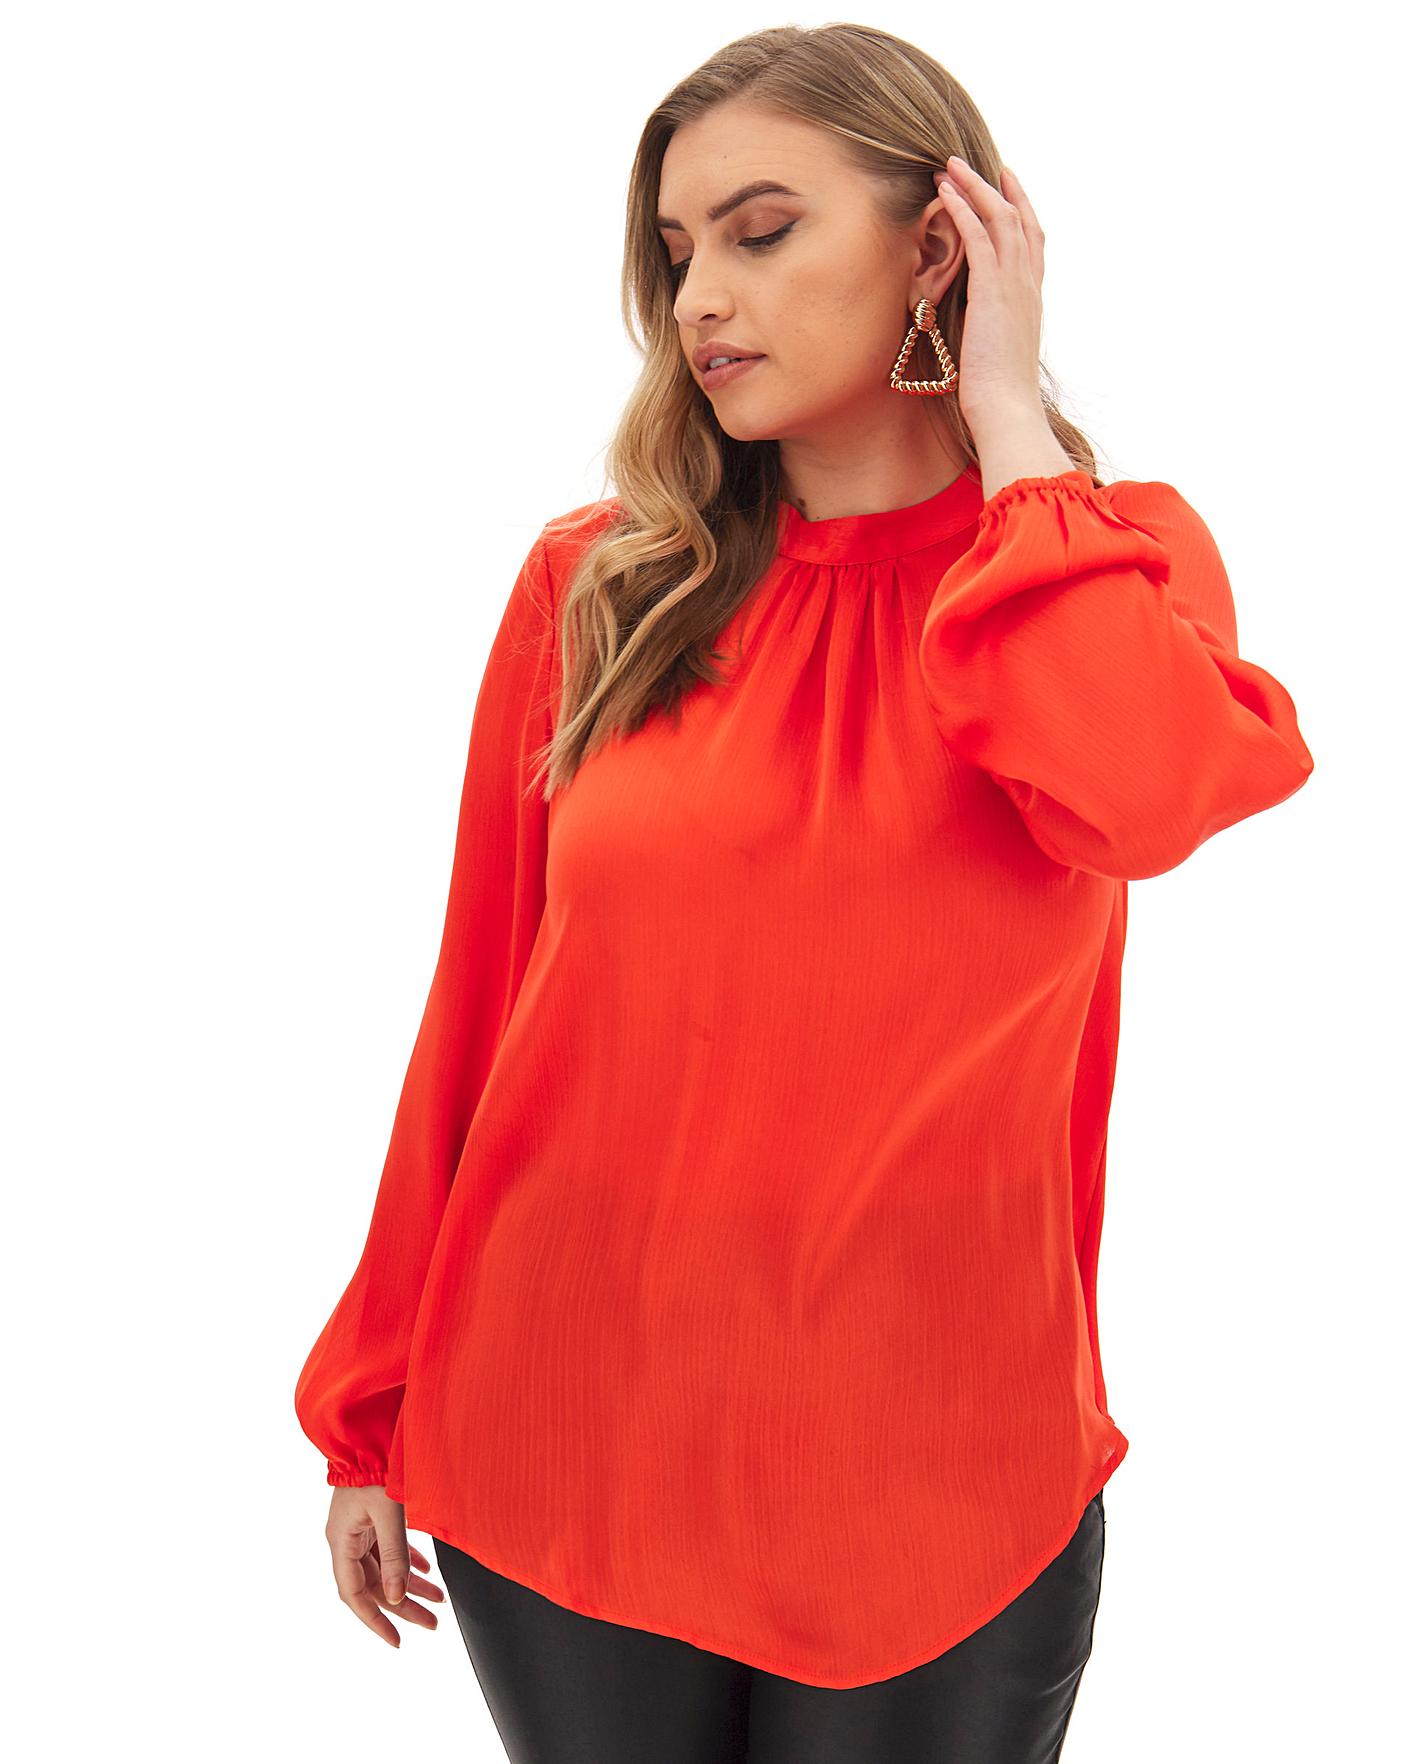 Red Satin High Neck Blouse | Simply Be